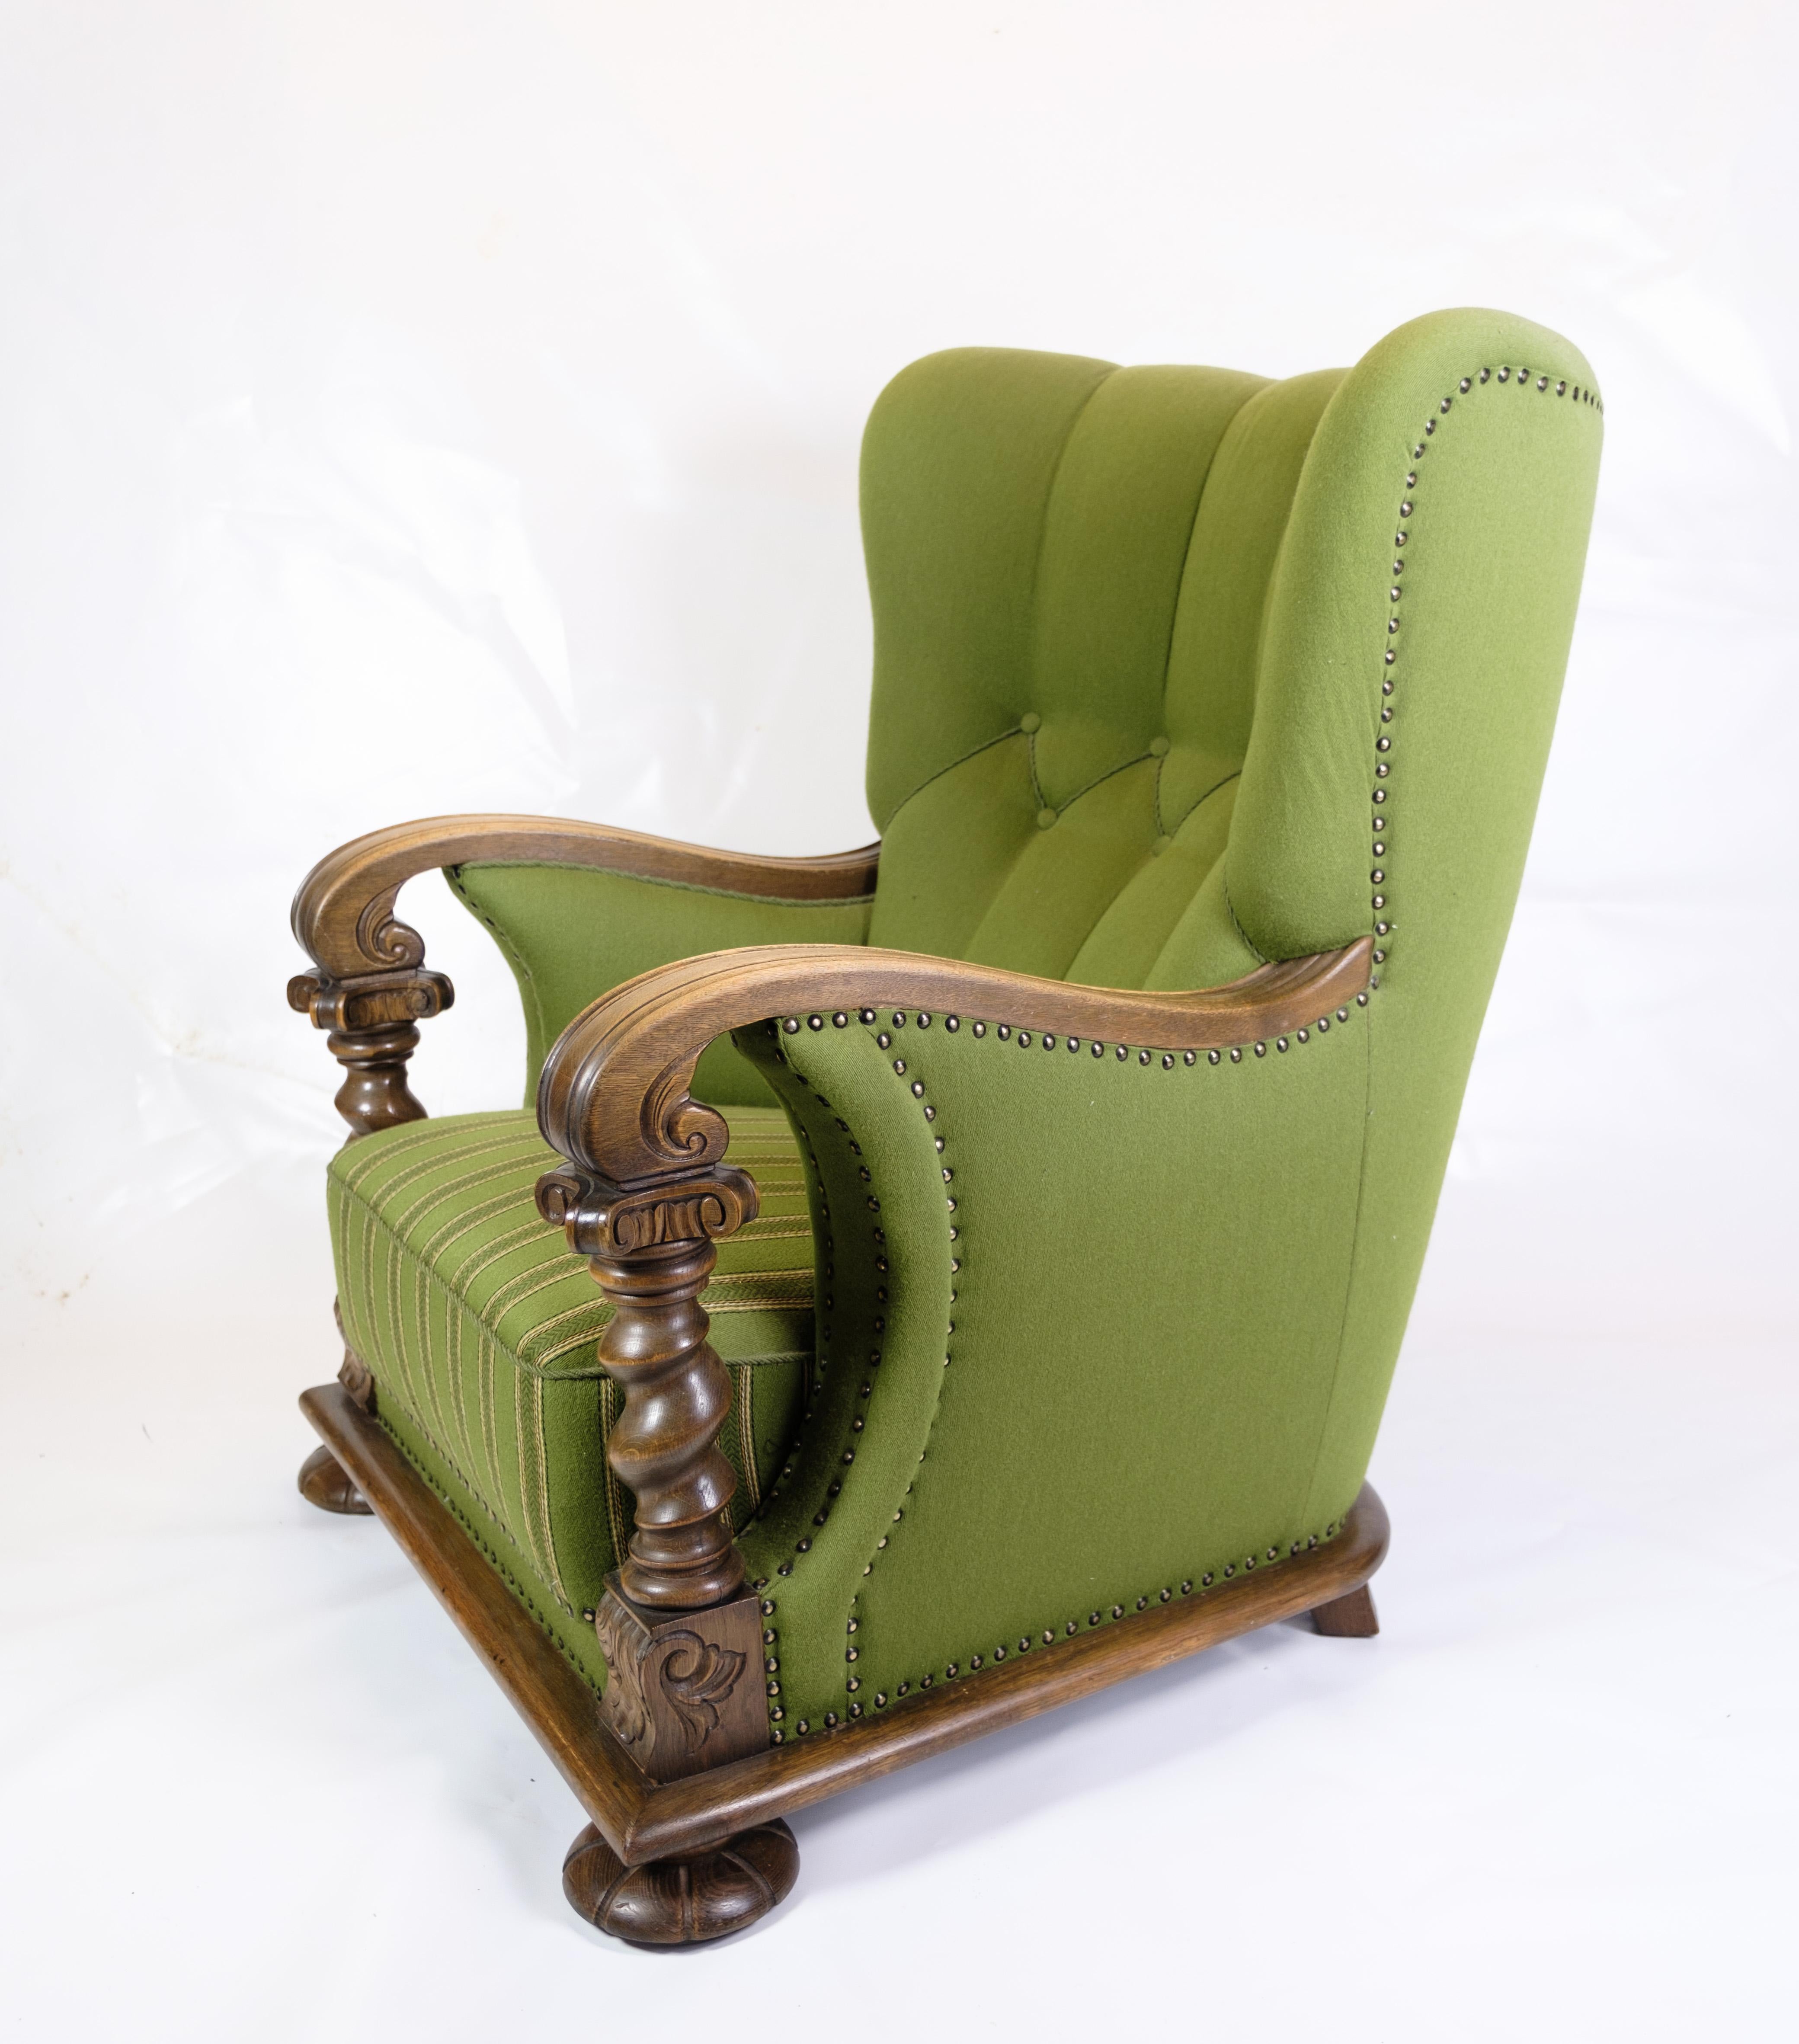 Step into Timeless Elegance: Renaissance-Inspired High-Back Armchair from the 1920s

Experience the grandeur of the Renaissance period embodied in this remarkable high-back armchair – a true testament to exquisite craftsmanship and enduring